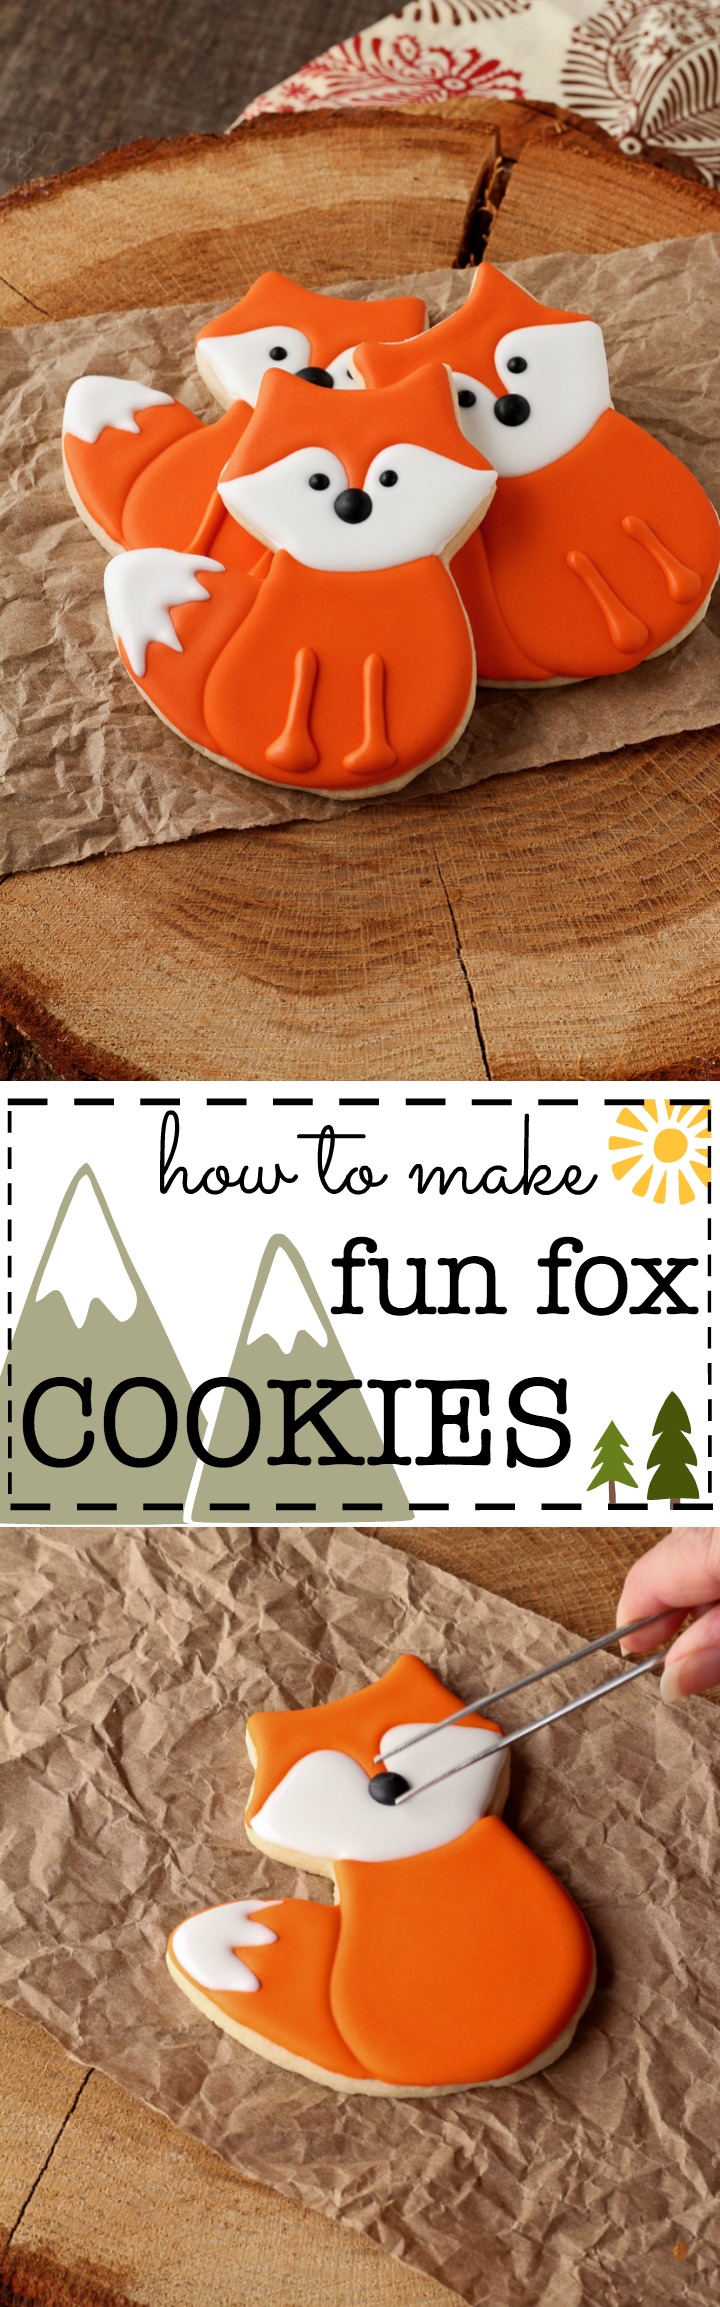 How to Make Fun Little Fox Cookies with a Video Tutorial | The Bearfoot Baker